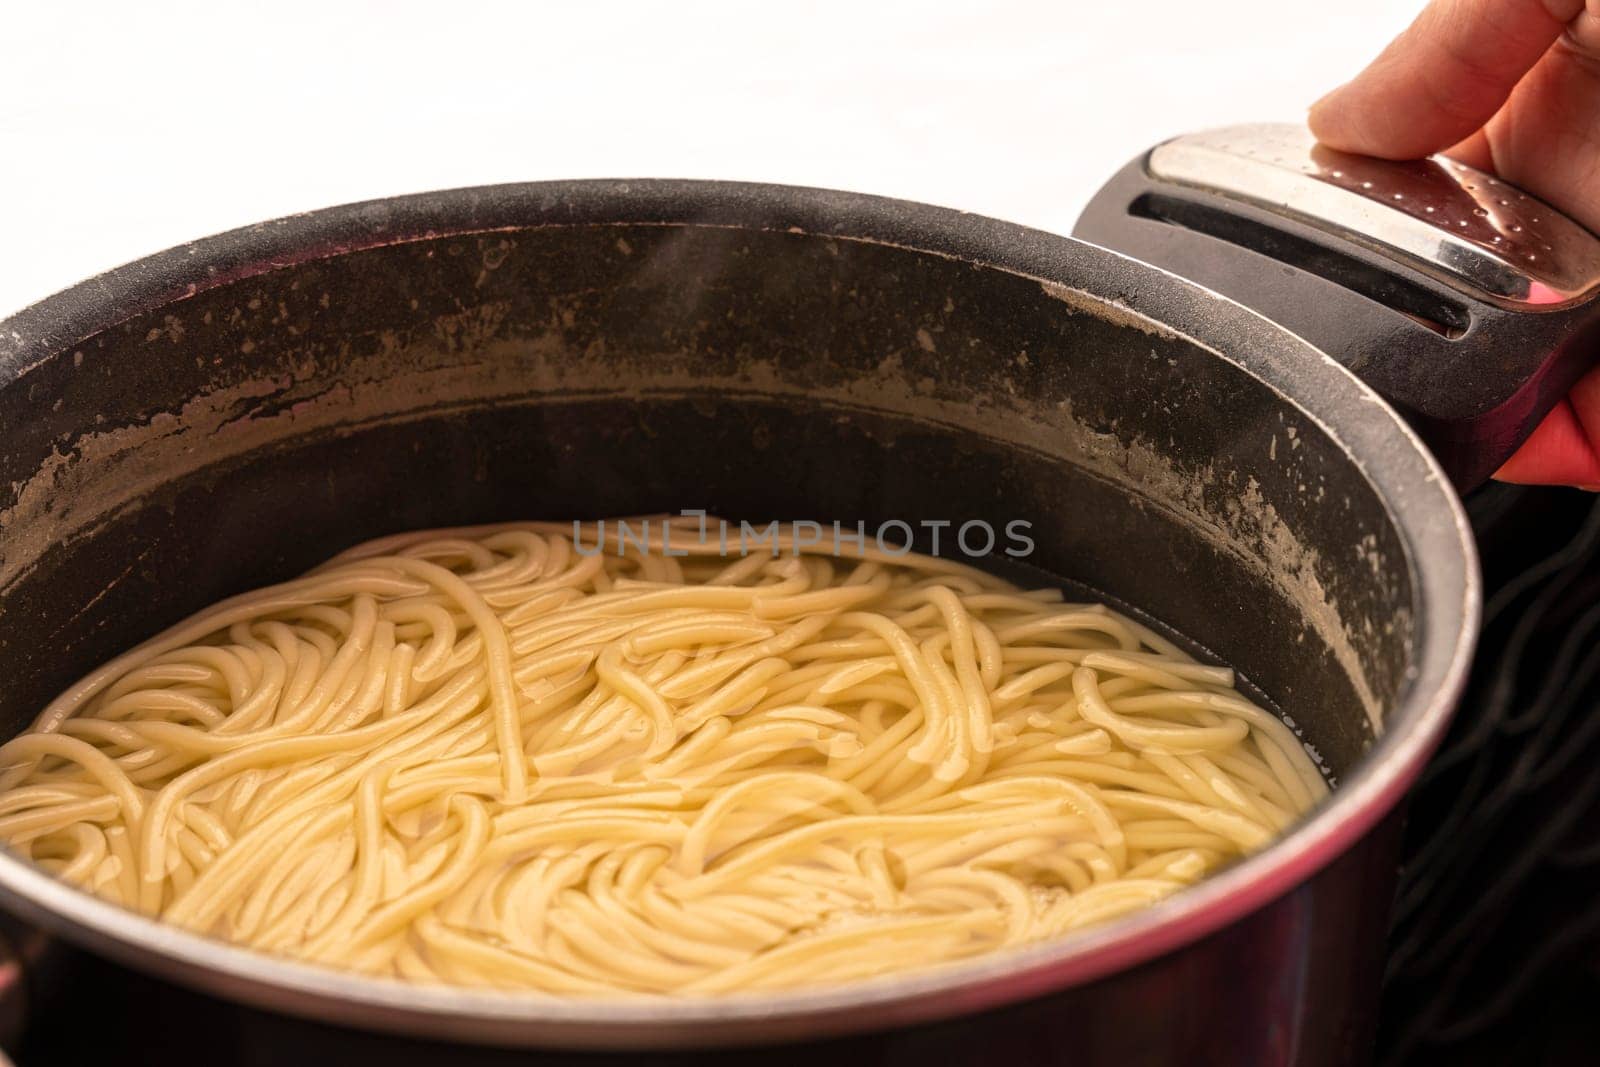 dinner at home. Simple vegetarian food. easy to cook. close-up of spaghetti in a saucepan in the hands of a cook.